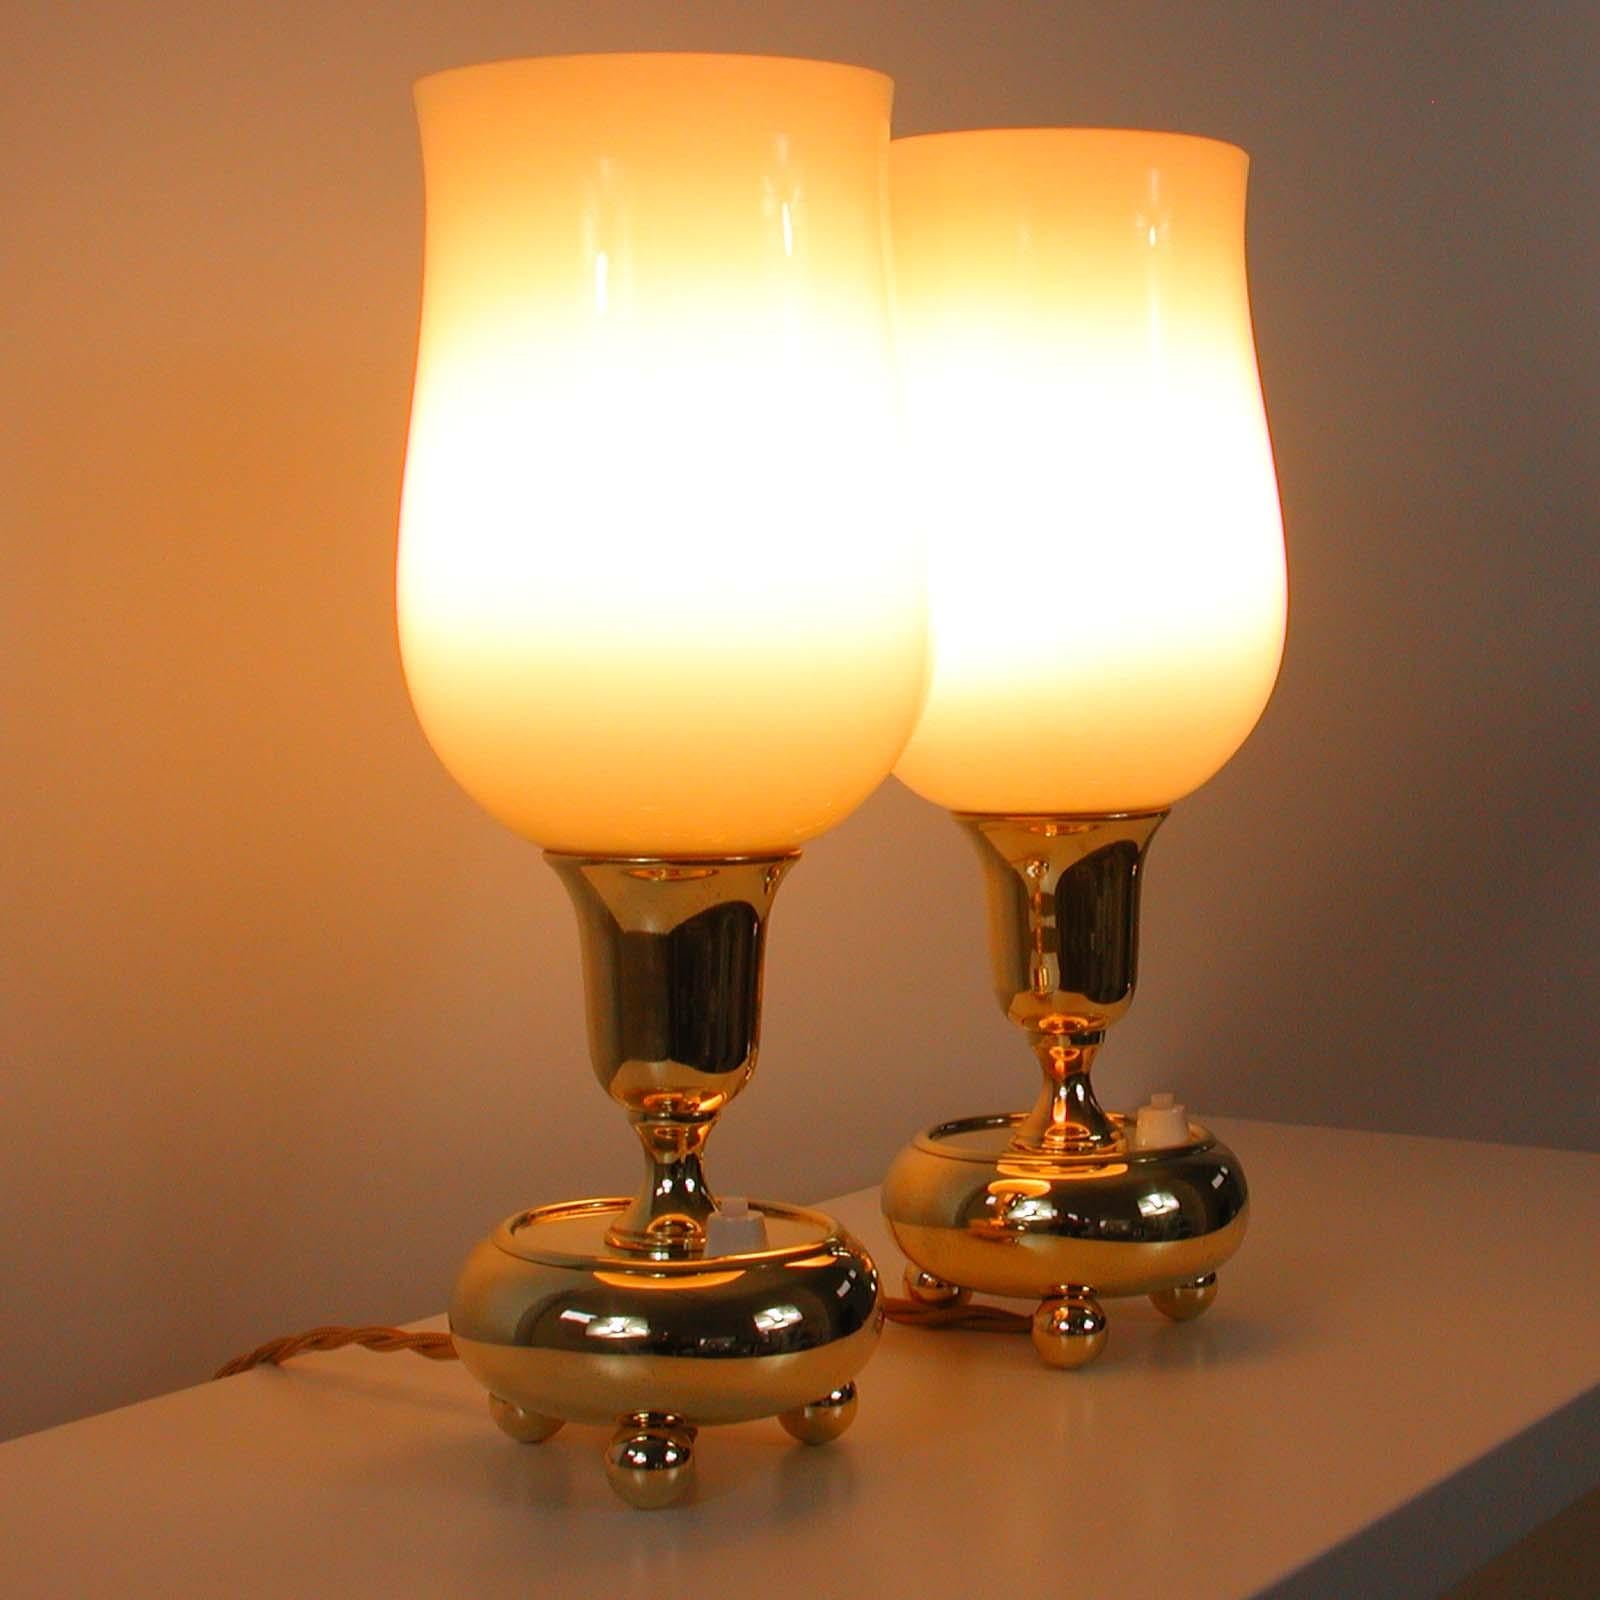 German Bauhaus Brass and Opal Torchiere Table Lamps, Set of 2, 1930s For Sale 4